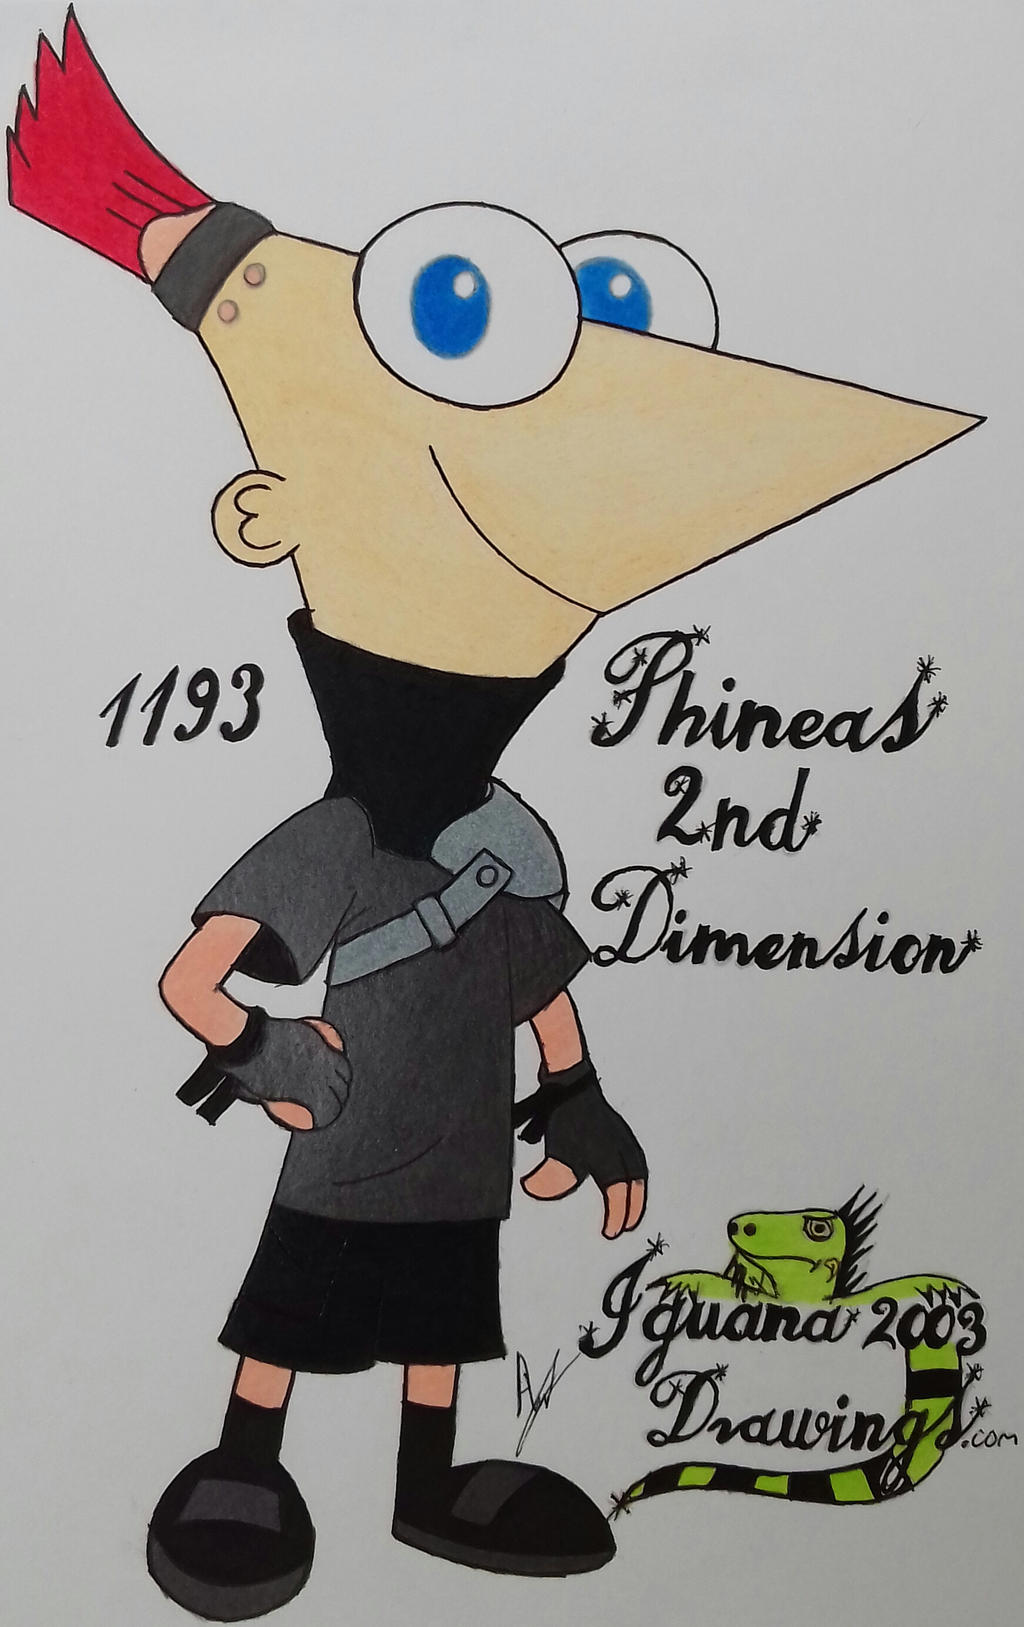 LUCA in Phineas and Ferb by Thoranin on DeviantArt